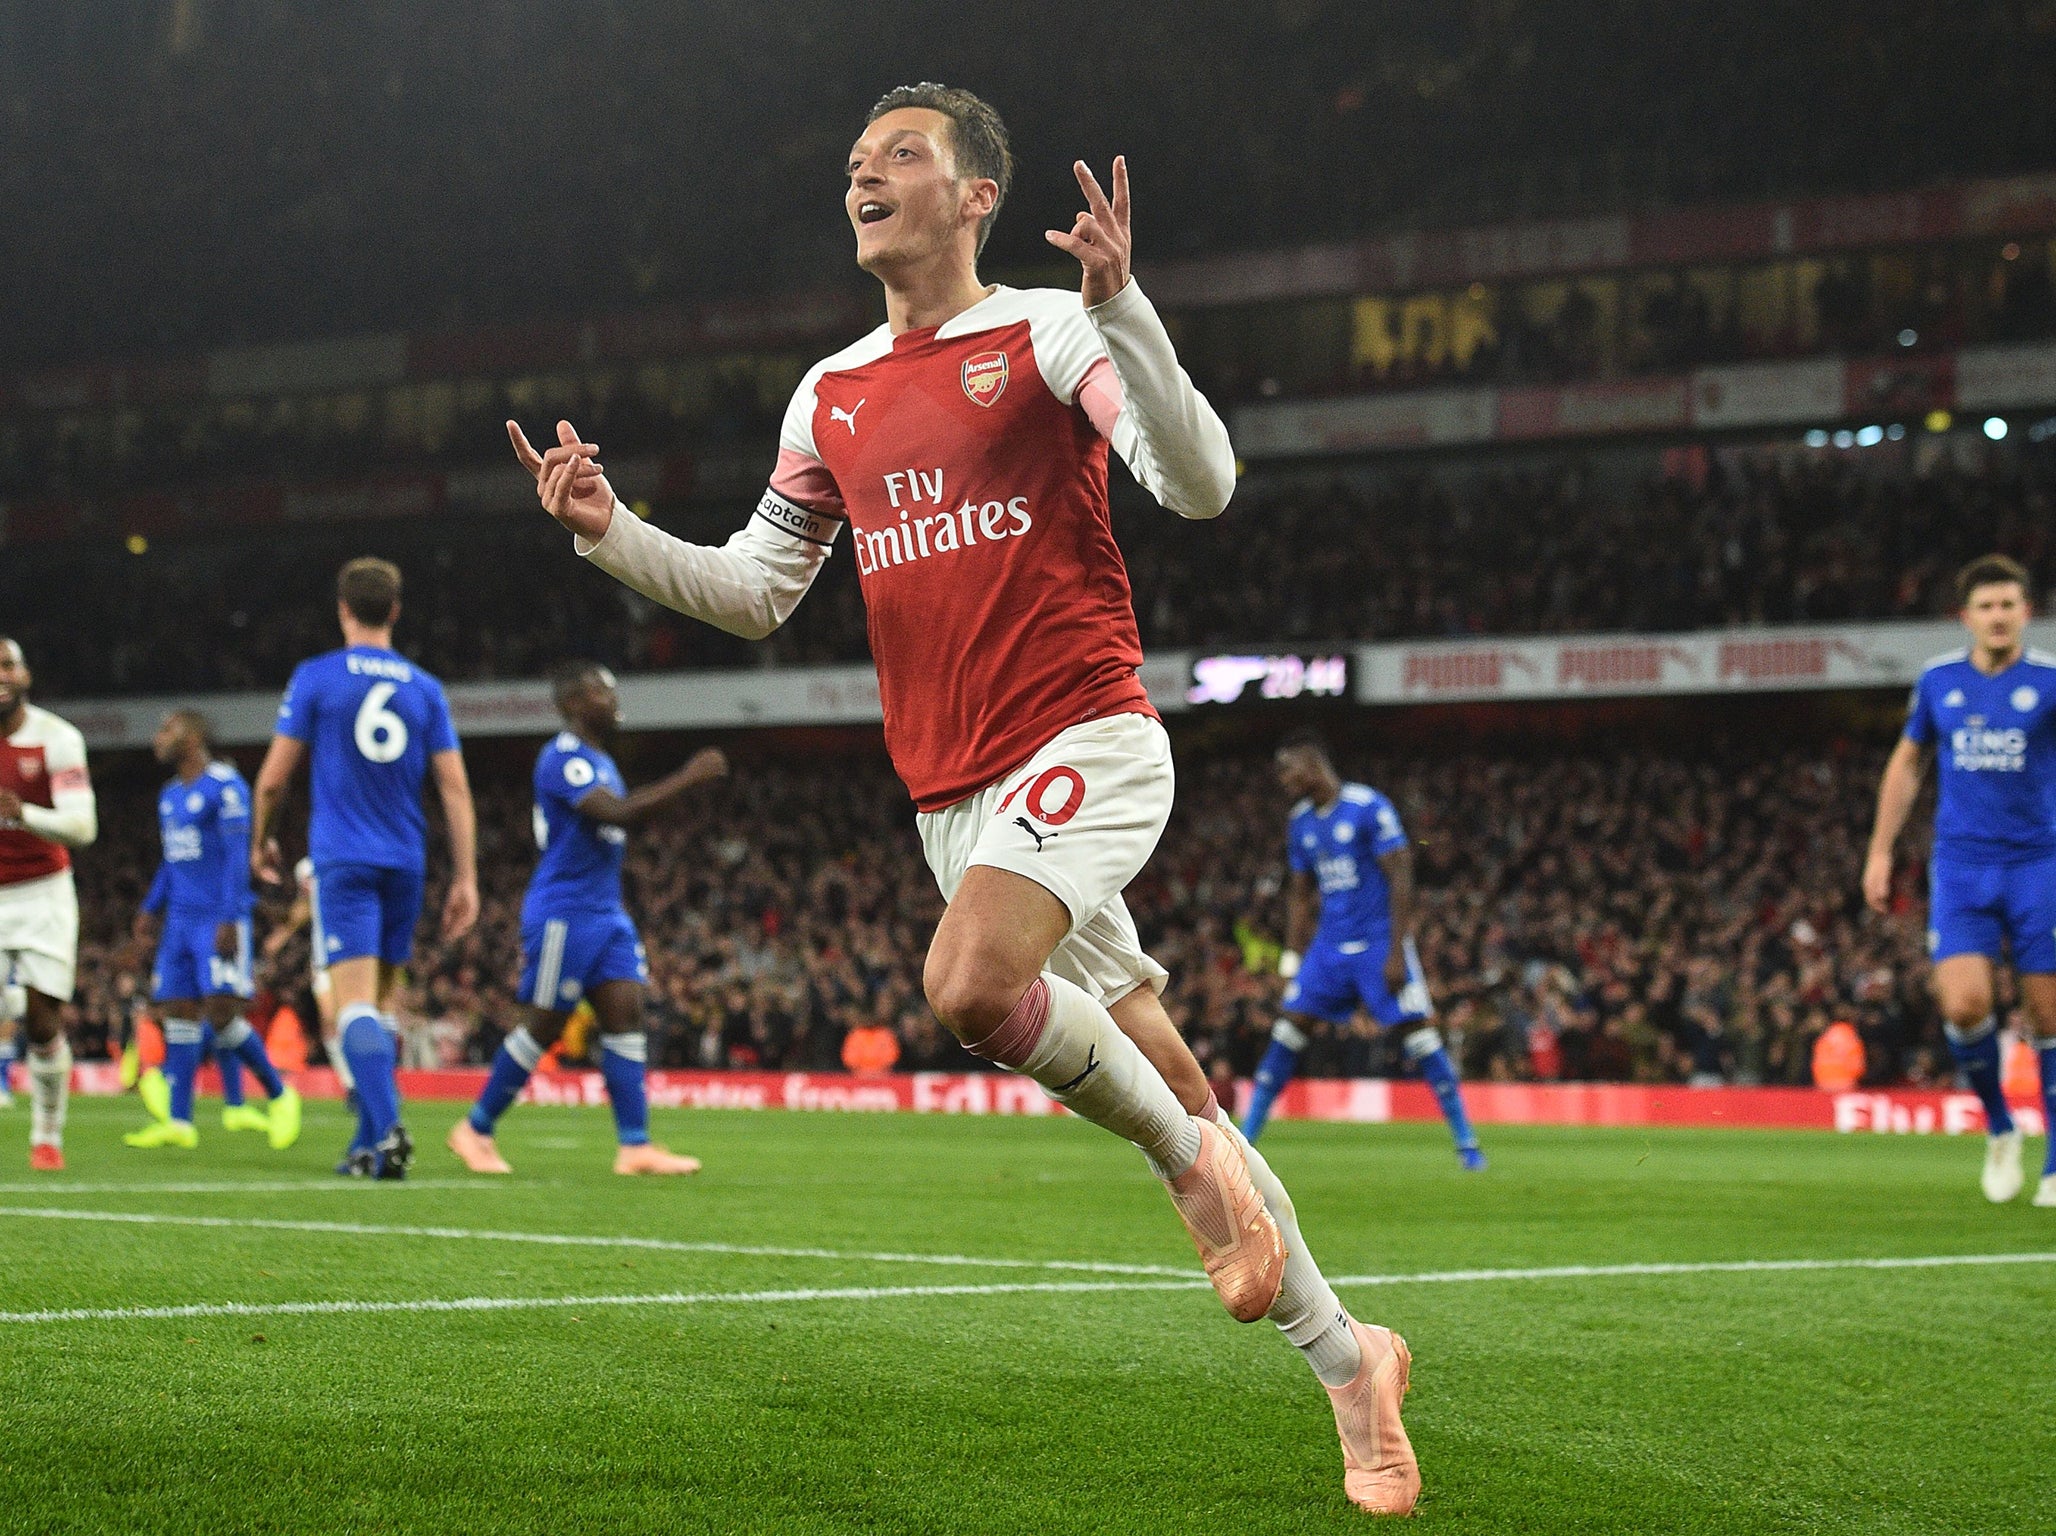 Mesut Ozil was sensational as Arsenal fought back to win